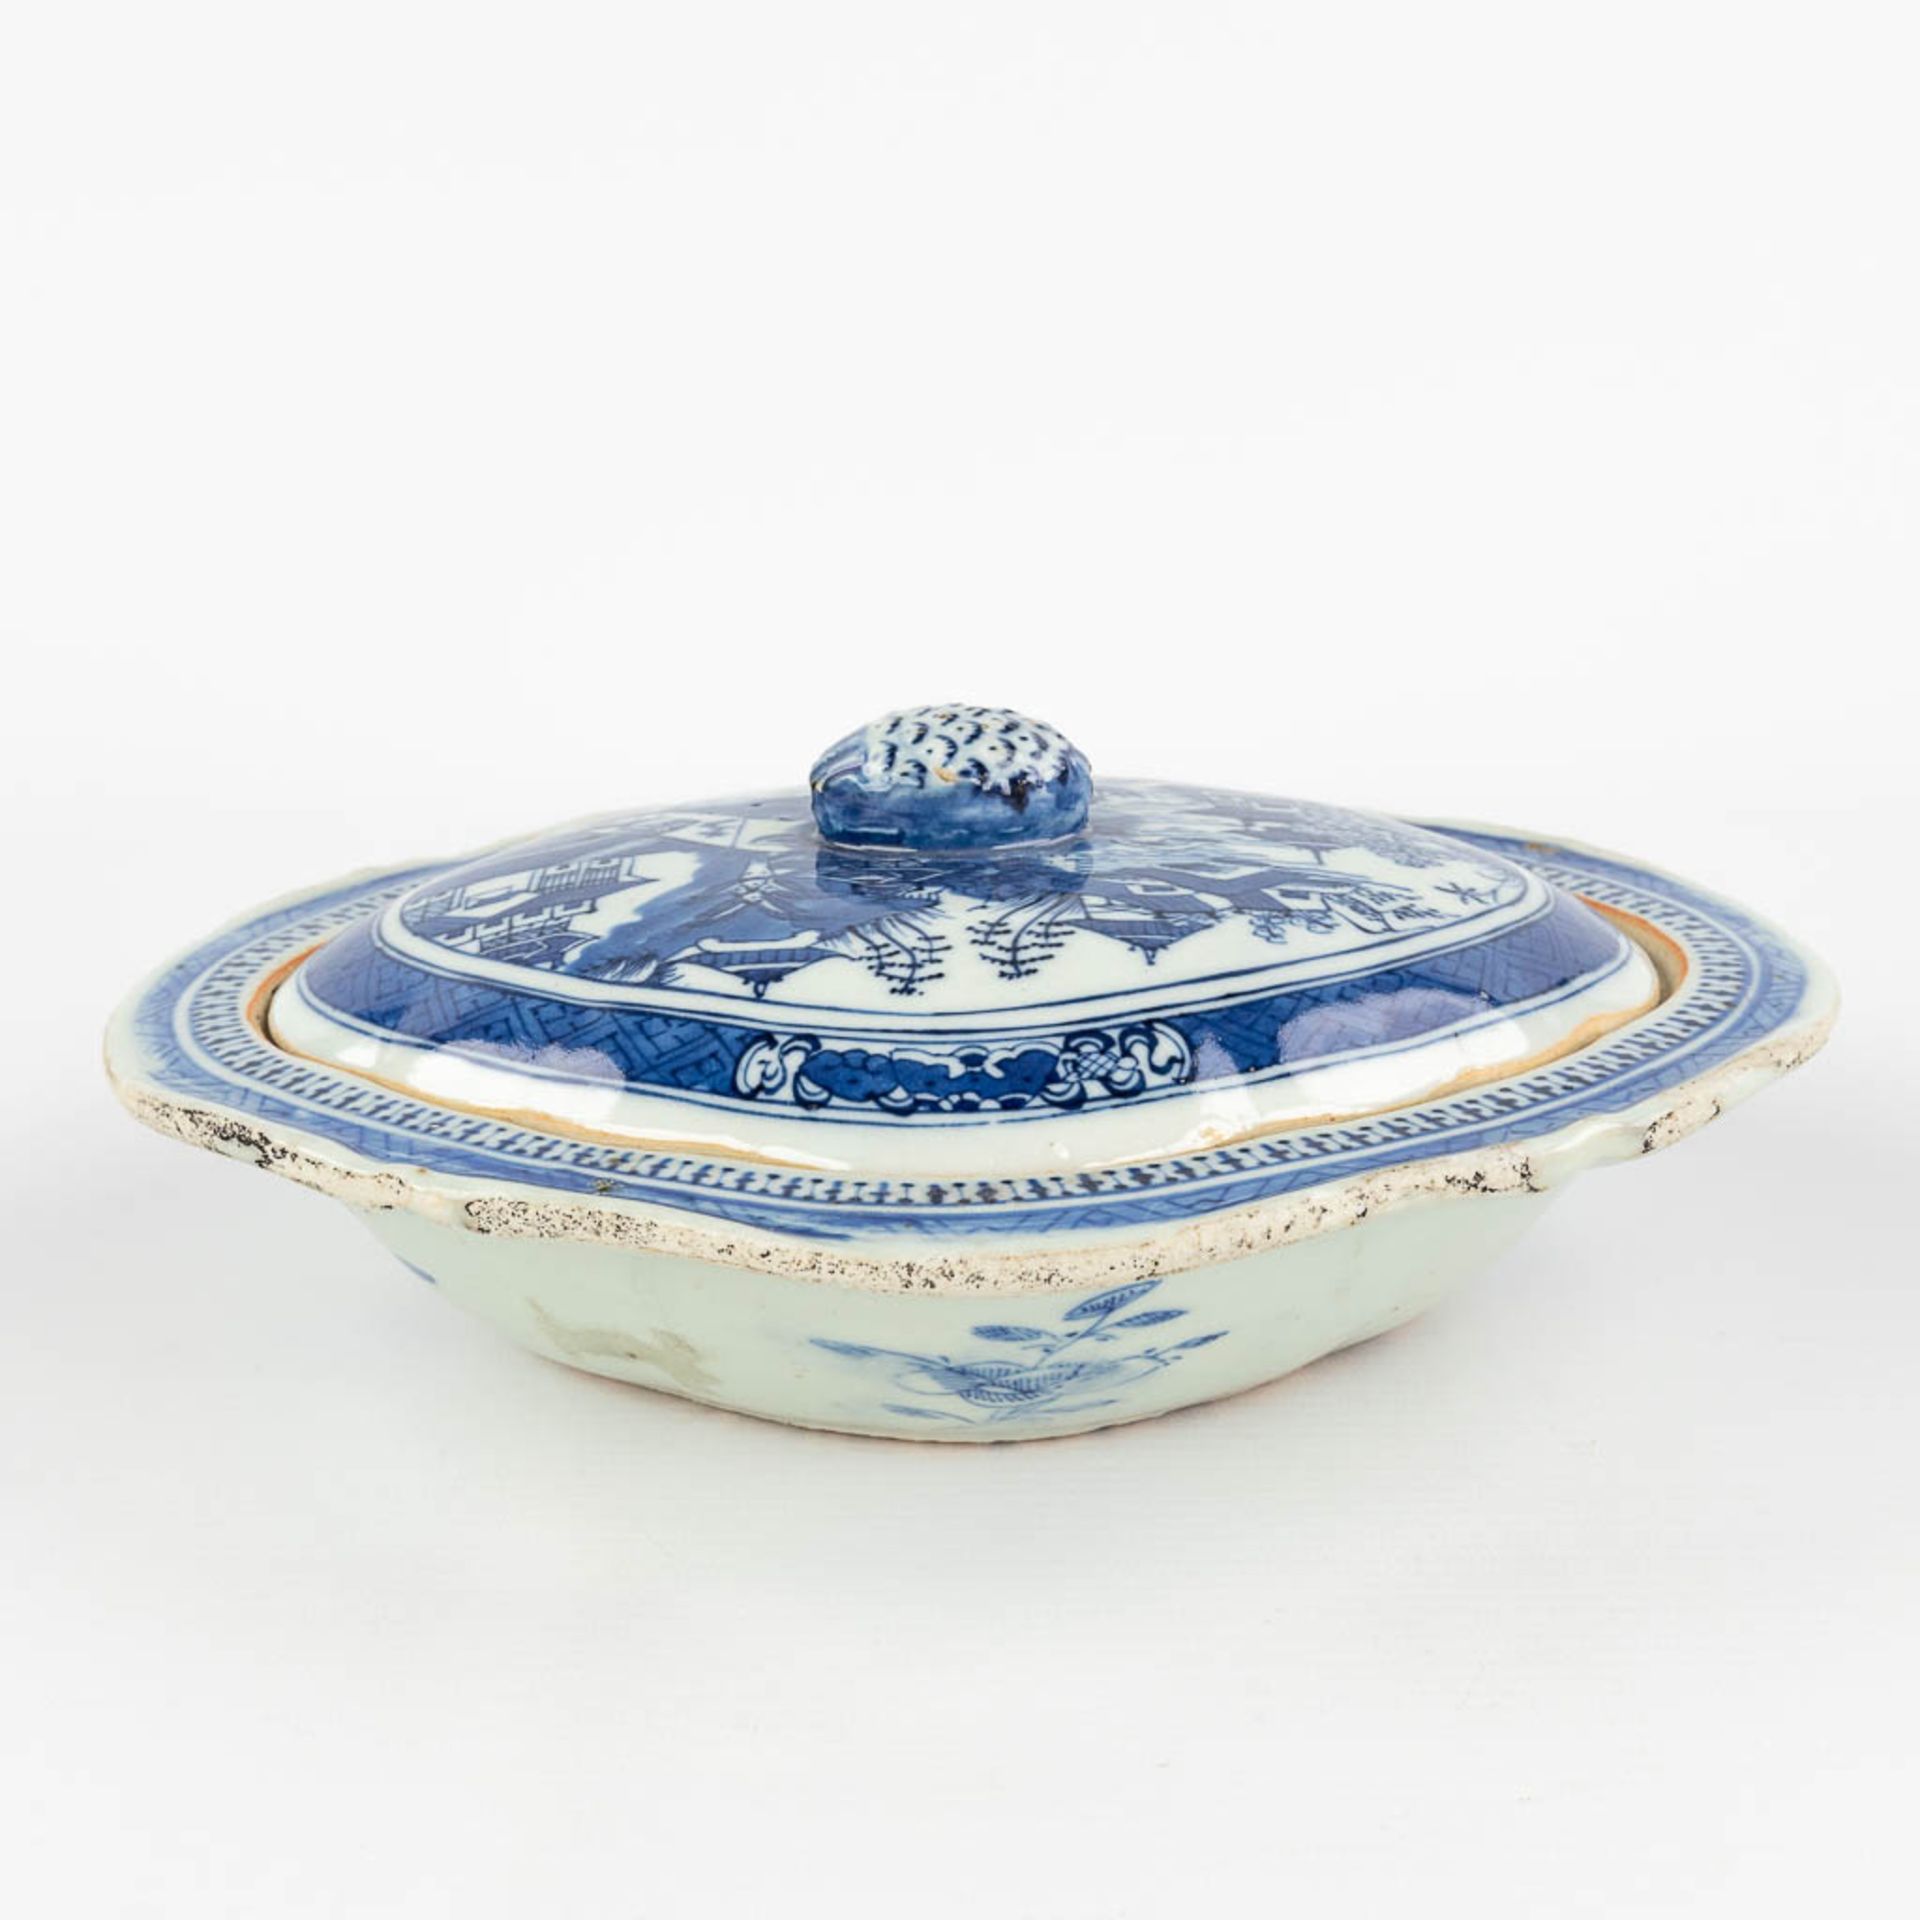 A Chinese bowl with a lid and blue-white landscape decor. 19th C. (L: 21,5 x W: 26,5 x H: 10 cm) - Image 5 of 15